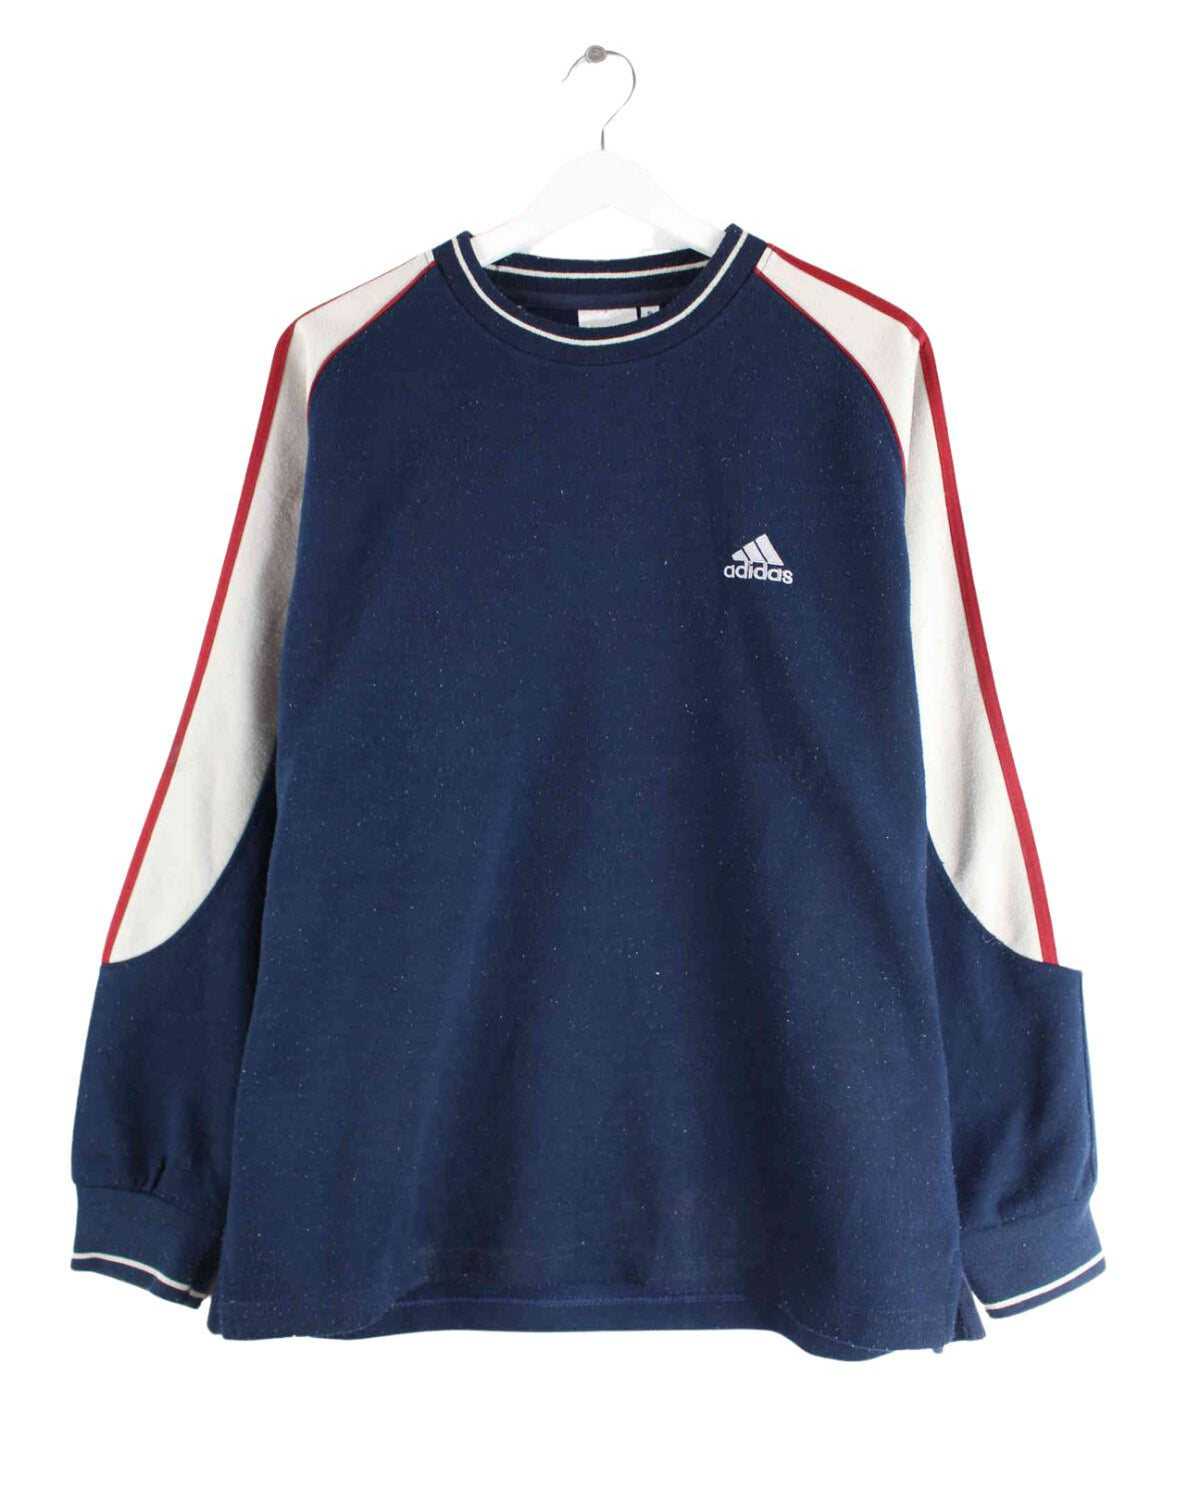 Adidas 90s Vintage Performace Sweater Blau M (front image)